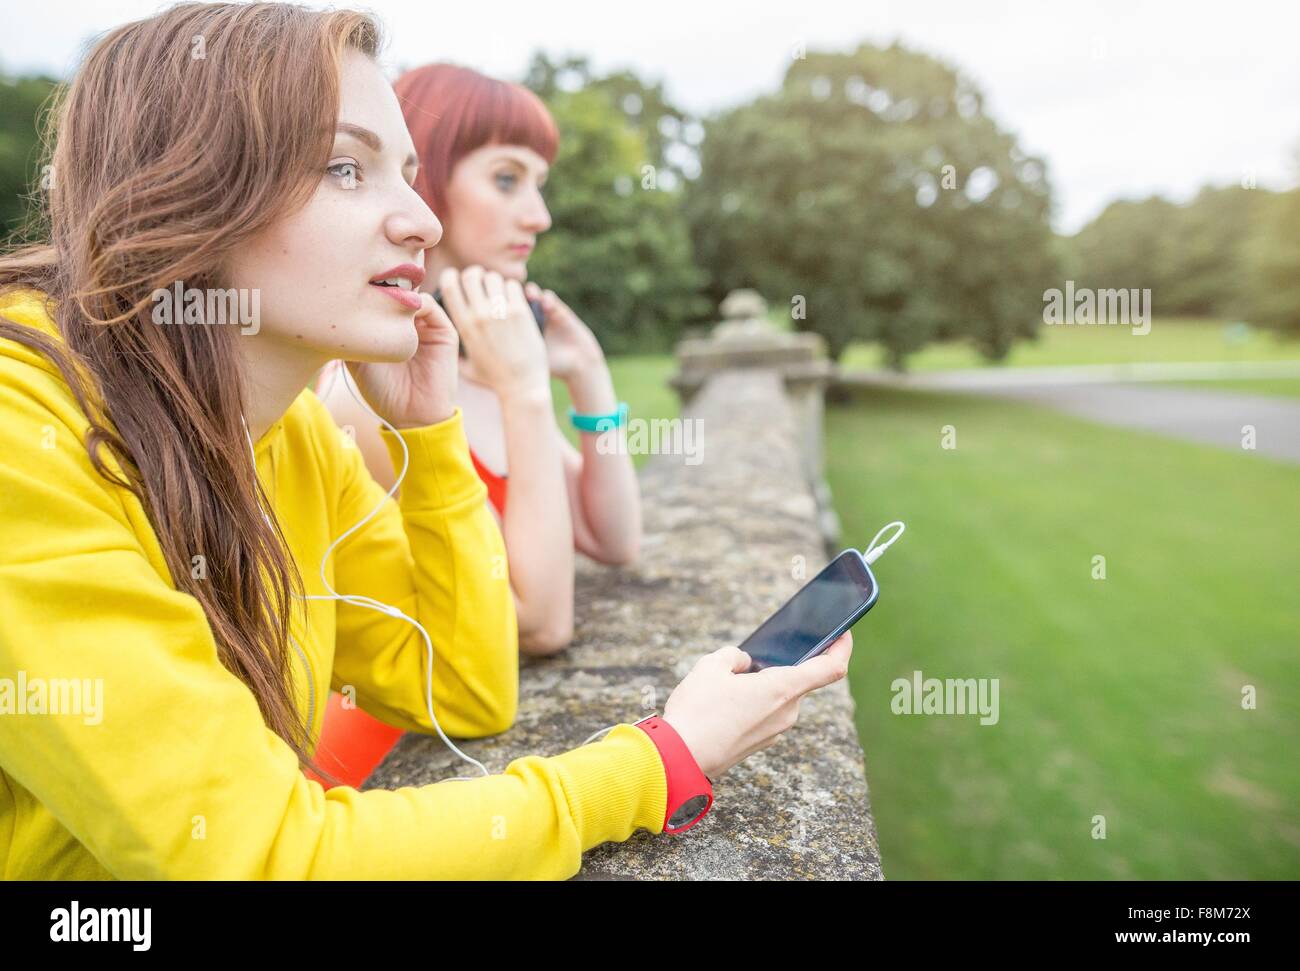 Young woman with smartphone leaning against stone wall Stock Photo